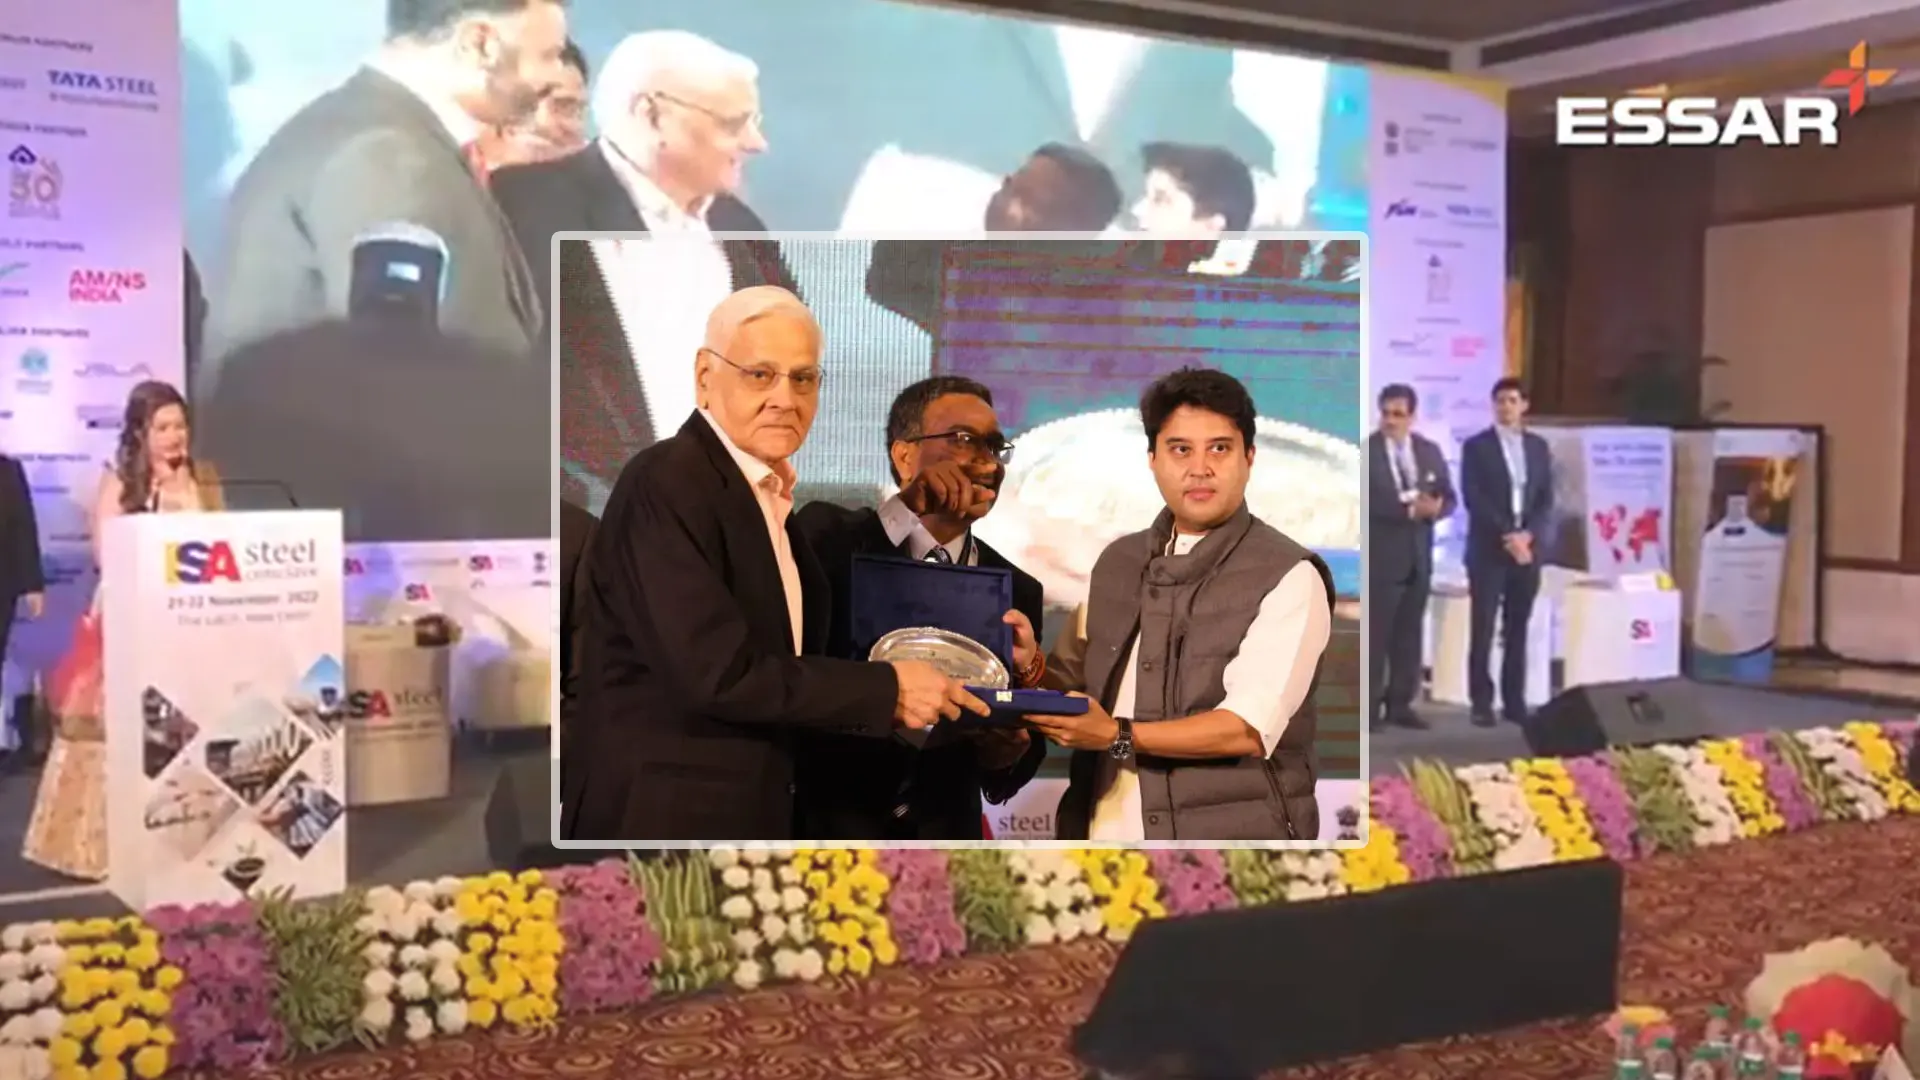 Mr J Mehra receives Lifetime Achievement Award at the ISA Steel Conclave 2022